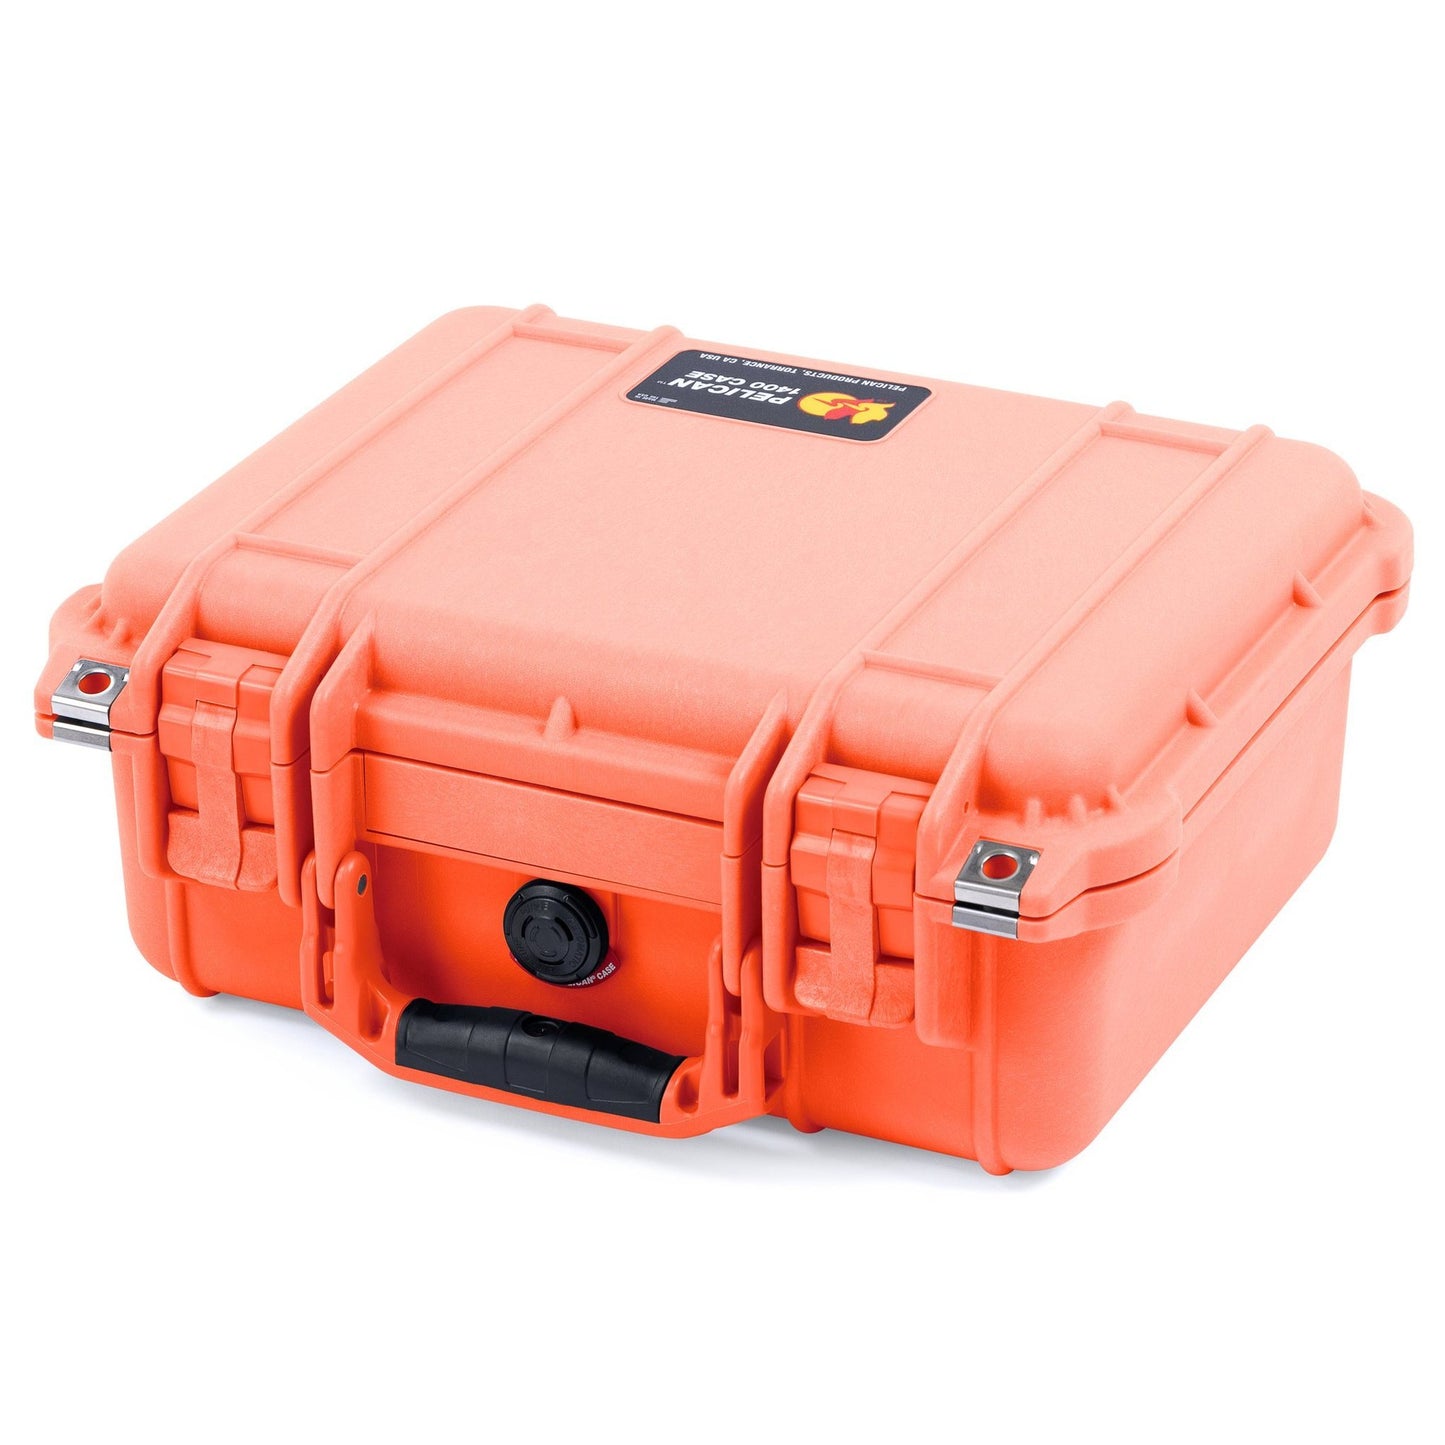 Pelican Protector Case Watertight Crushproof Hard Case with Pick N Pluck Foam and Rubber Over-Molded Handle | Model 1400